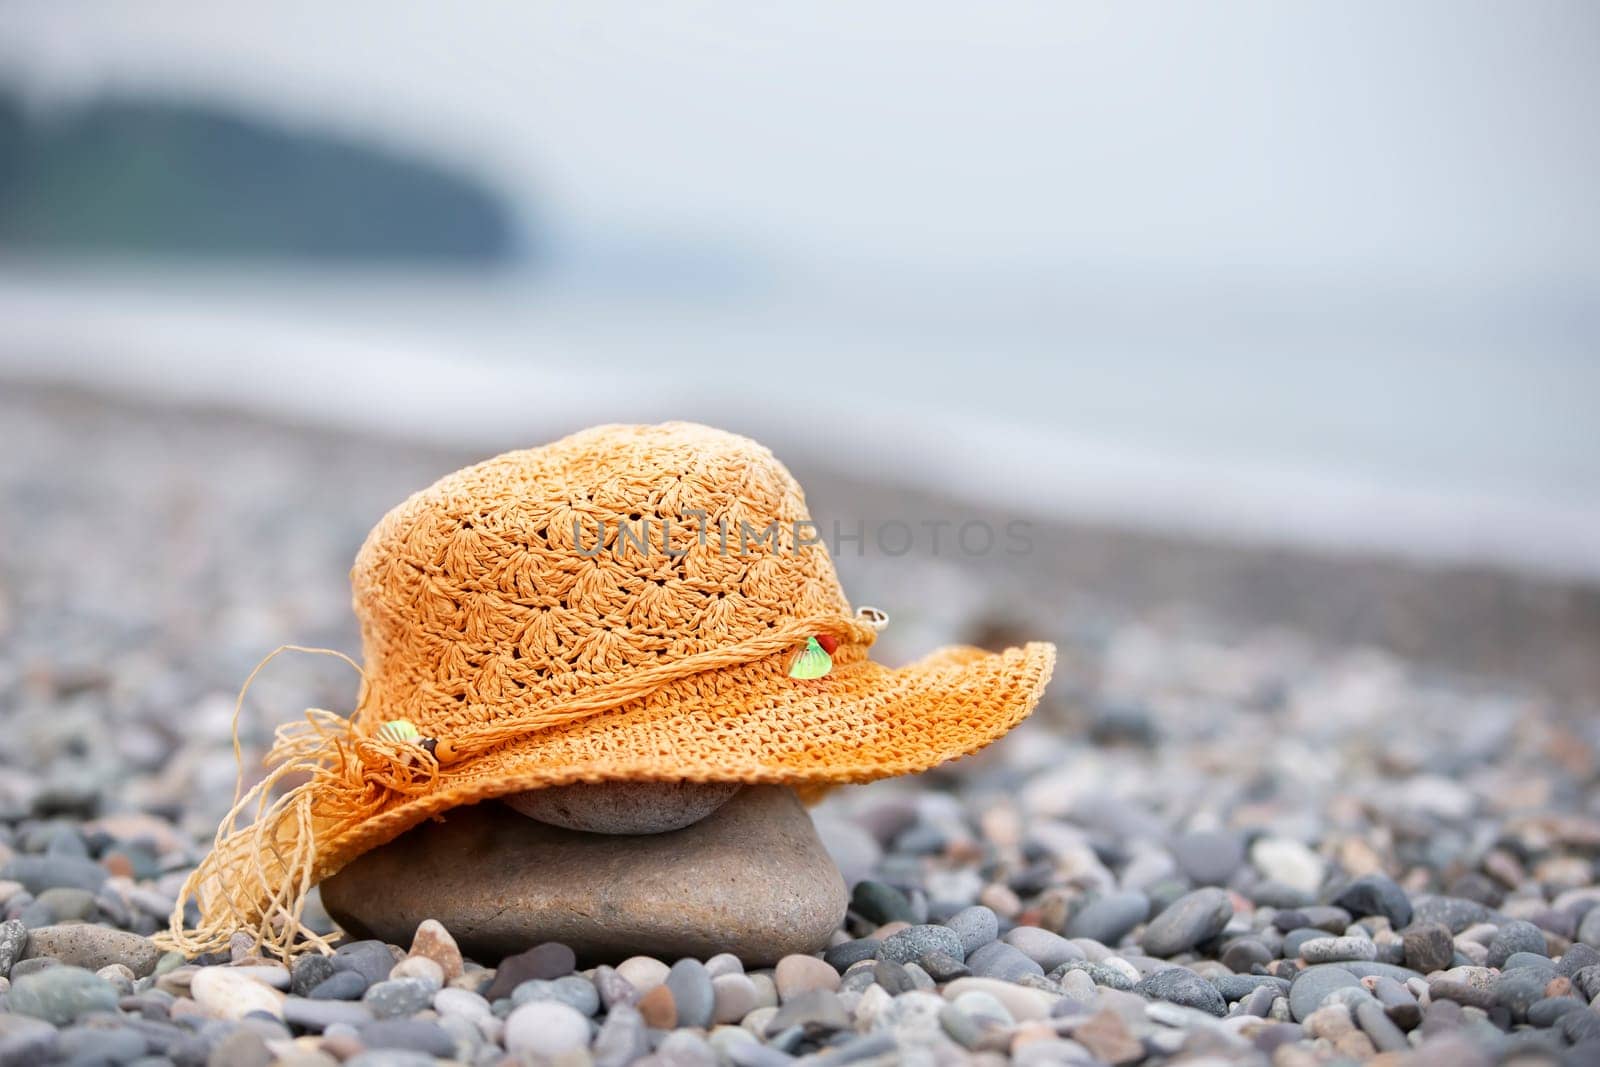 A straw beach hat lies on a pebble by the sea.